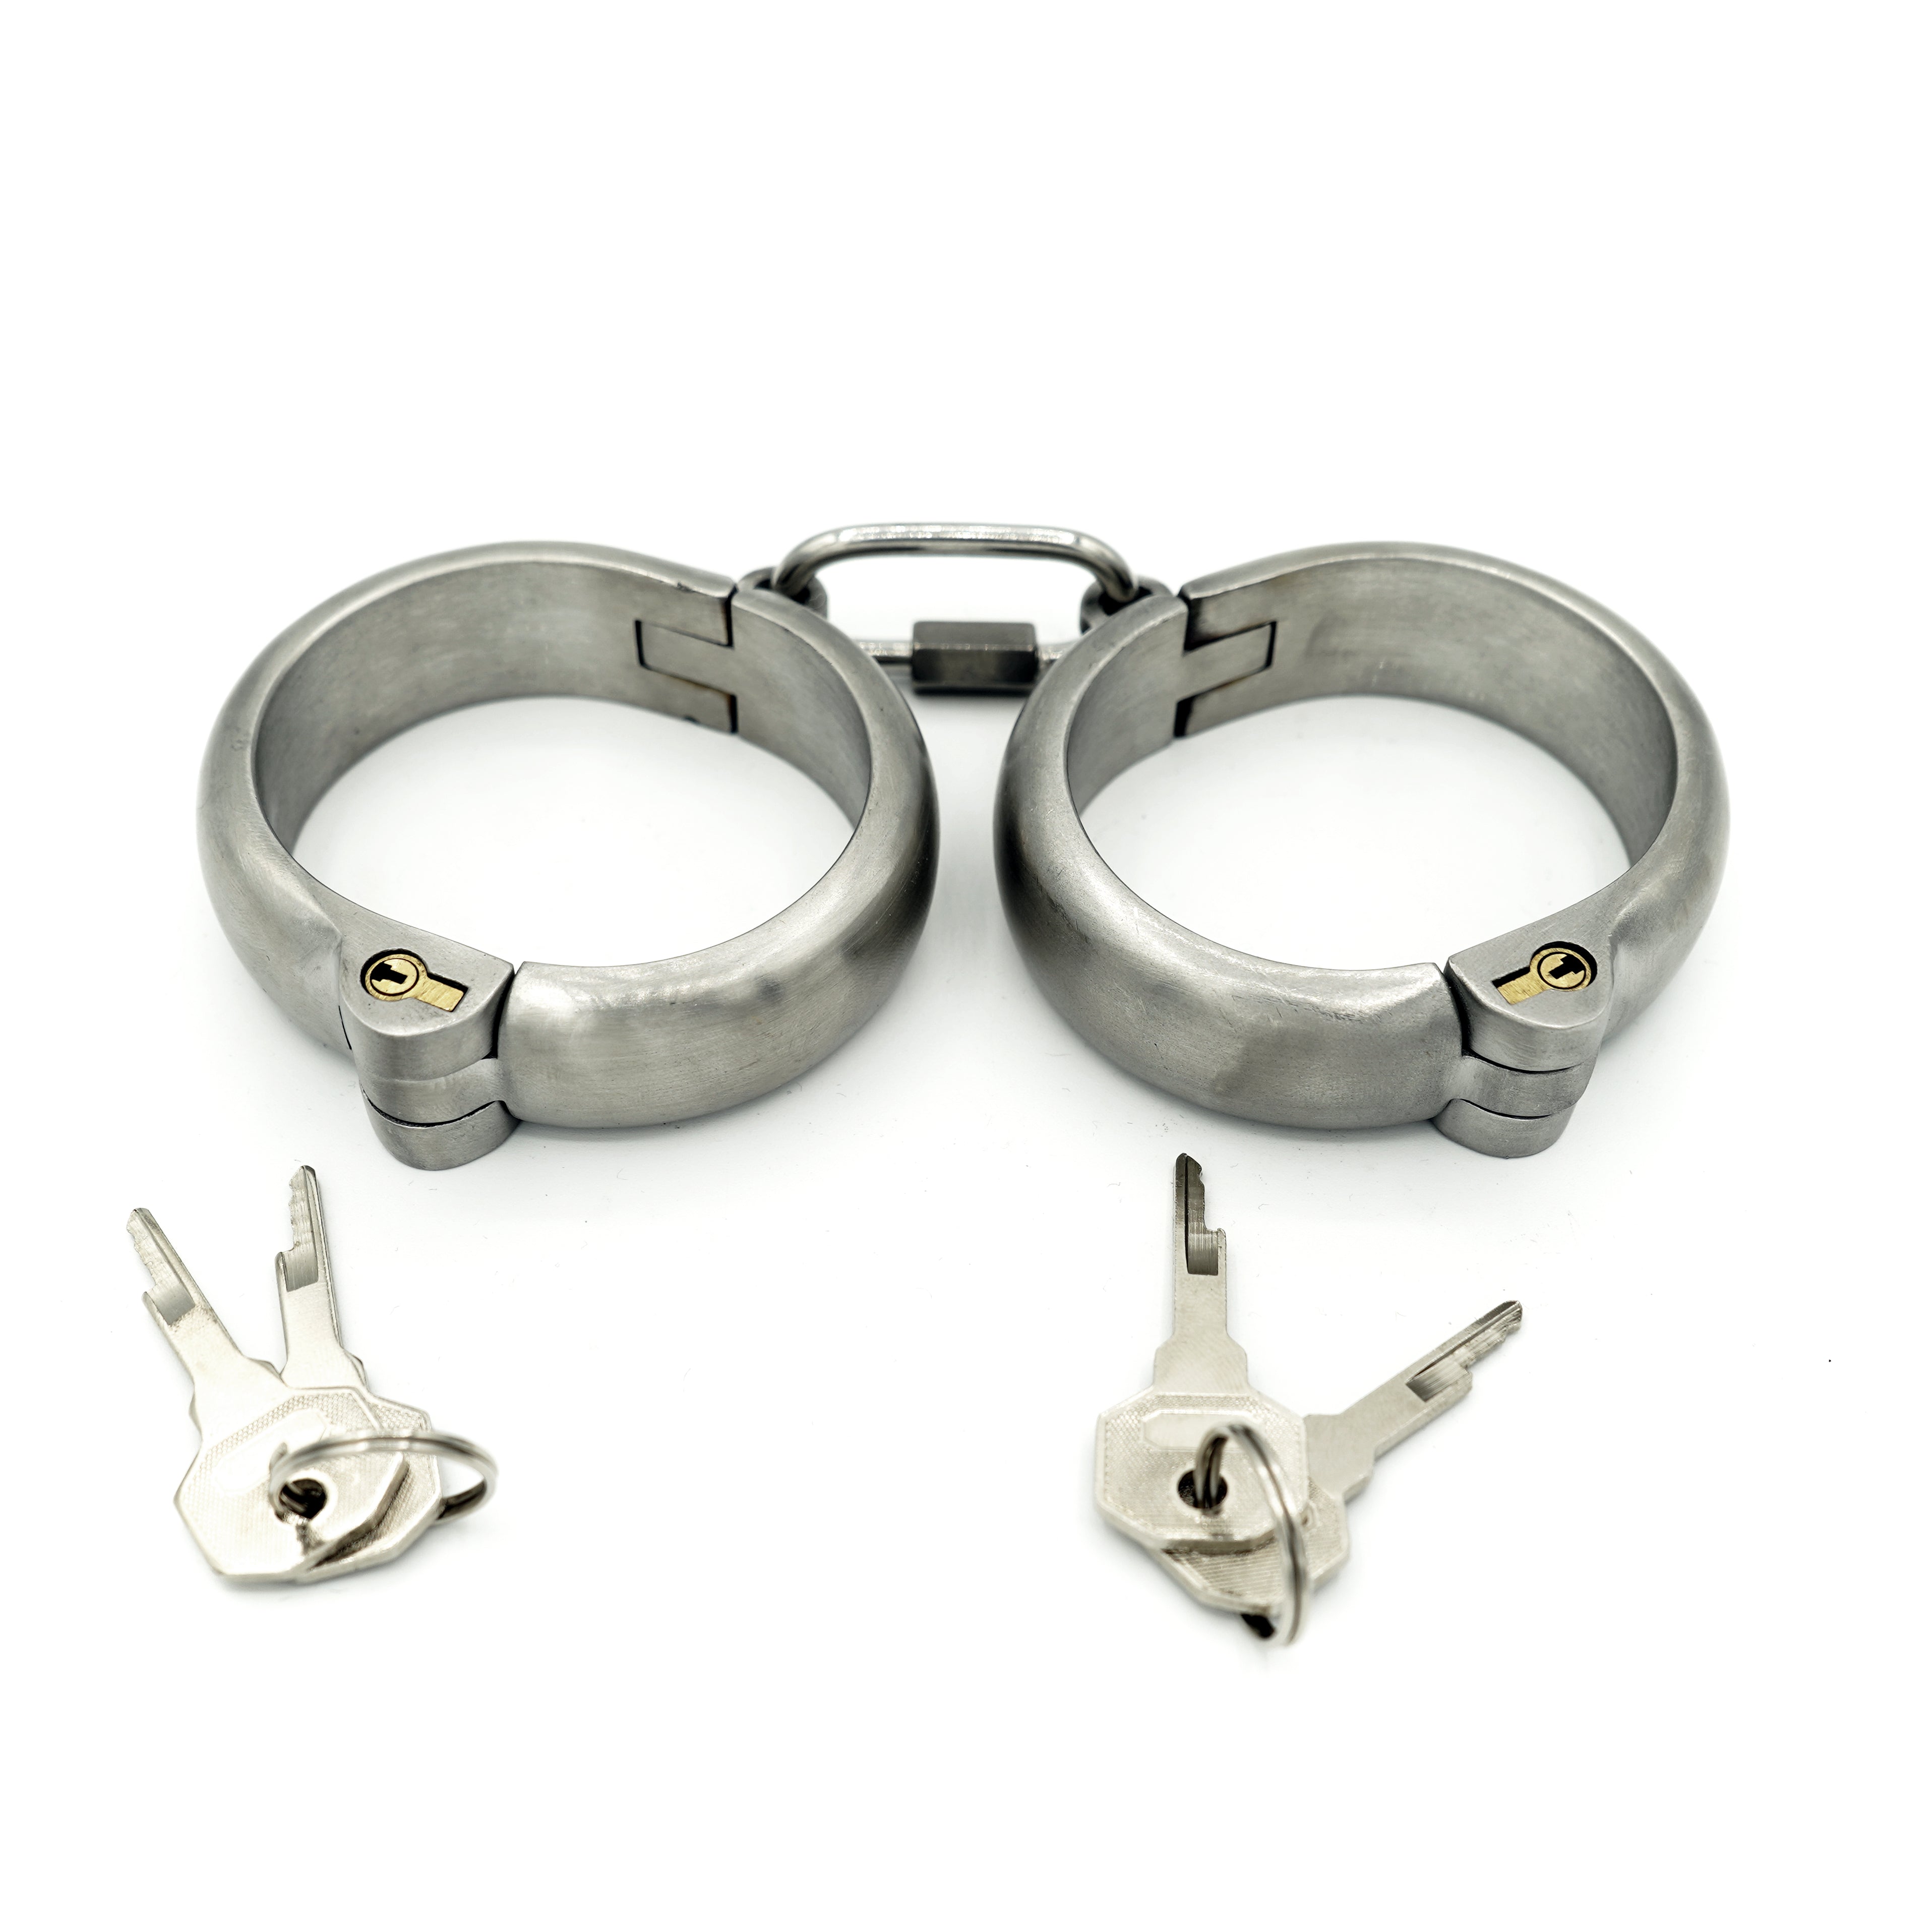 Solid stainless steel shackles with key lock and chain – selfbondage-shop